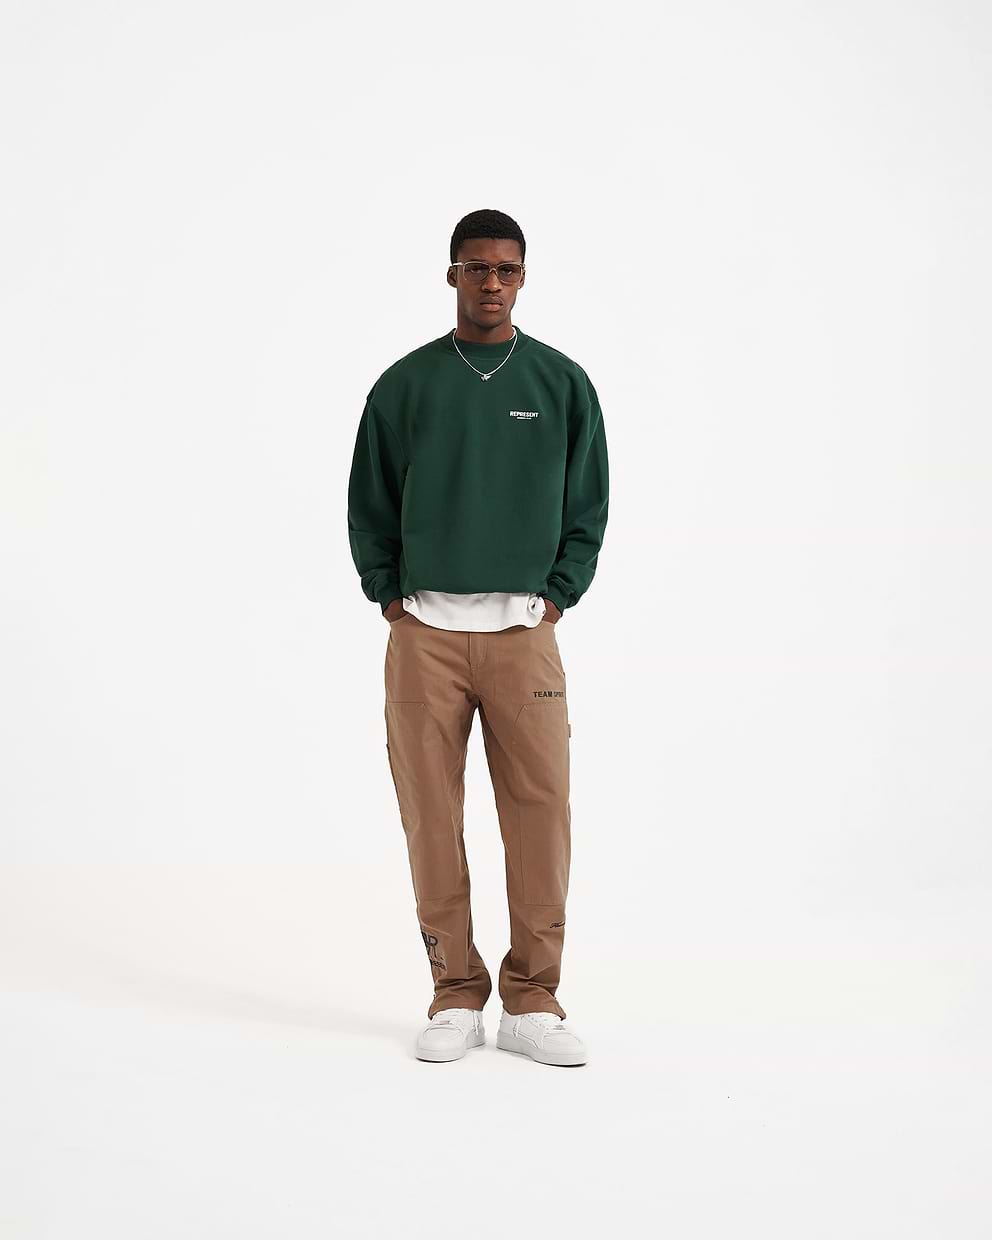 Represent Owners Club Sweater - Racing Green